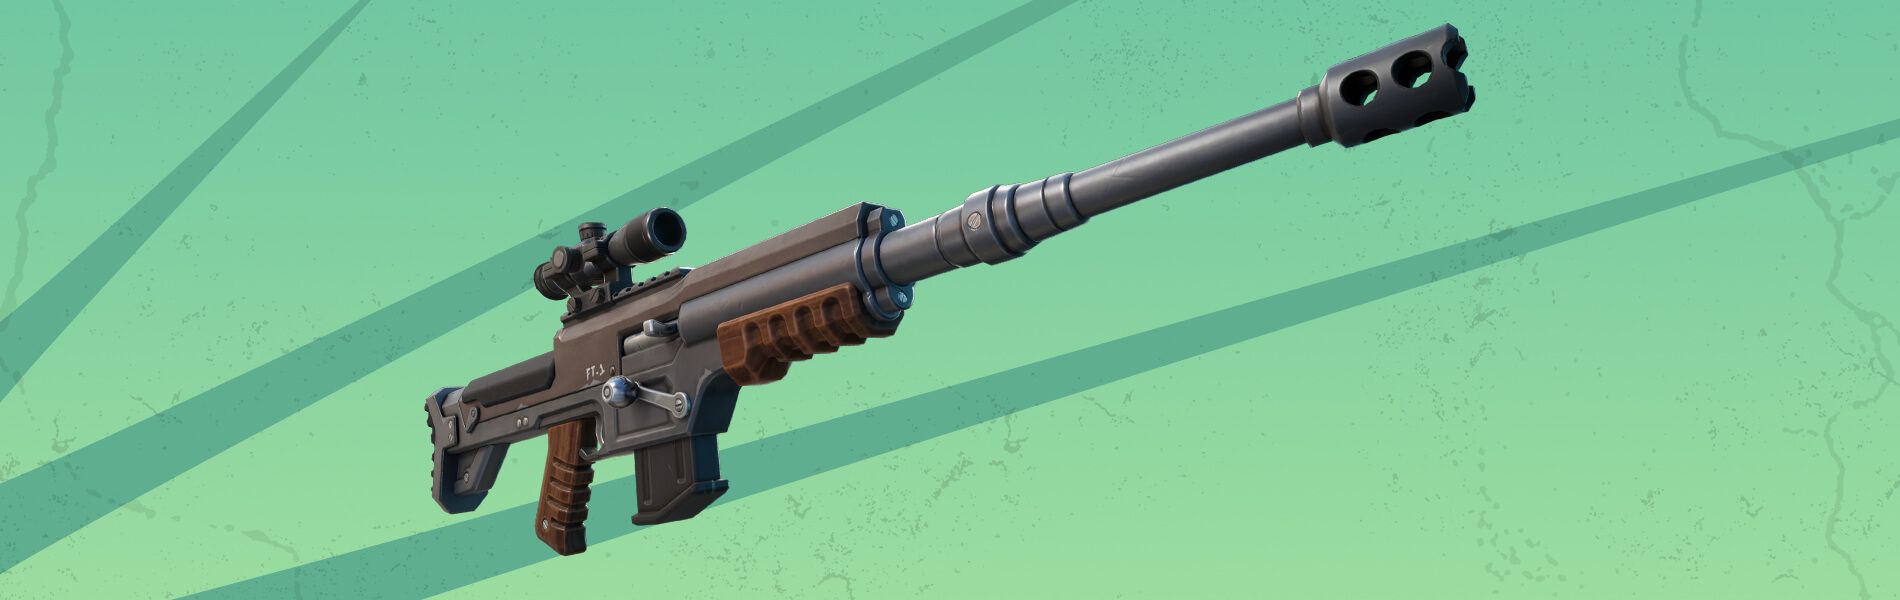 Fortnite V4.4 Patch Notes - Update brings new Thermal Scope